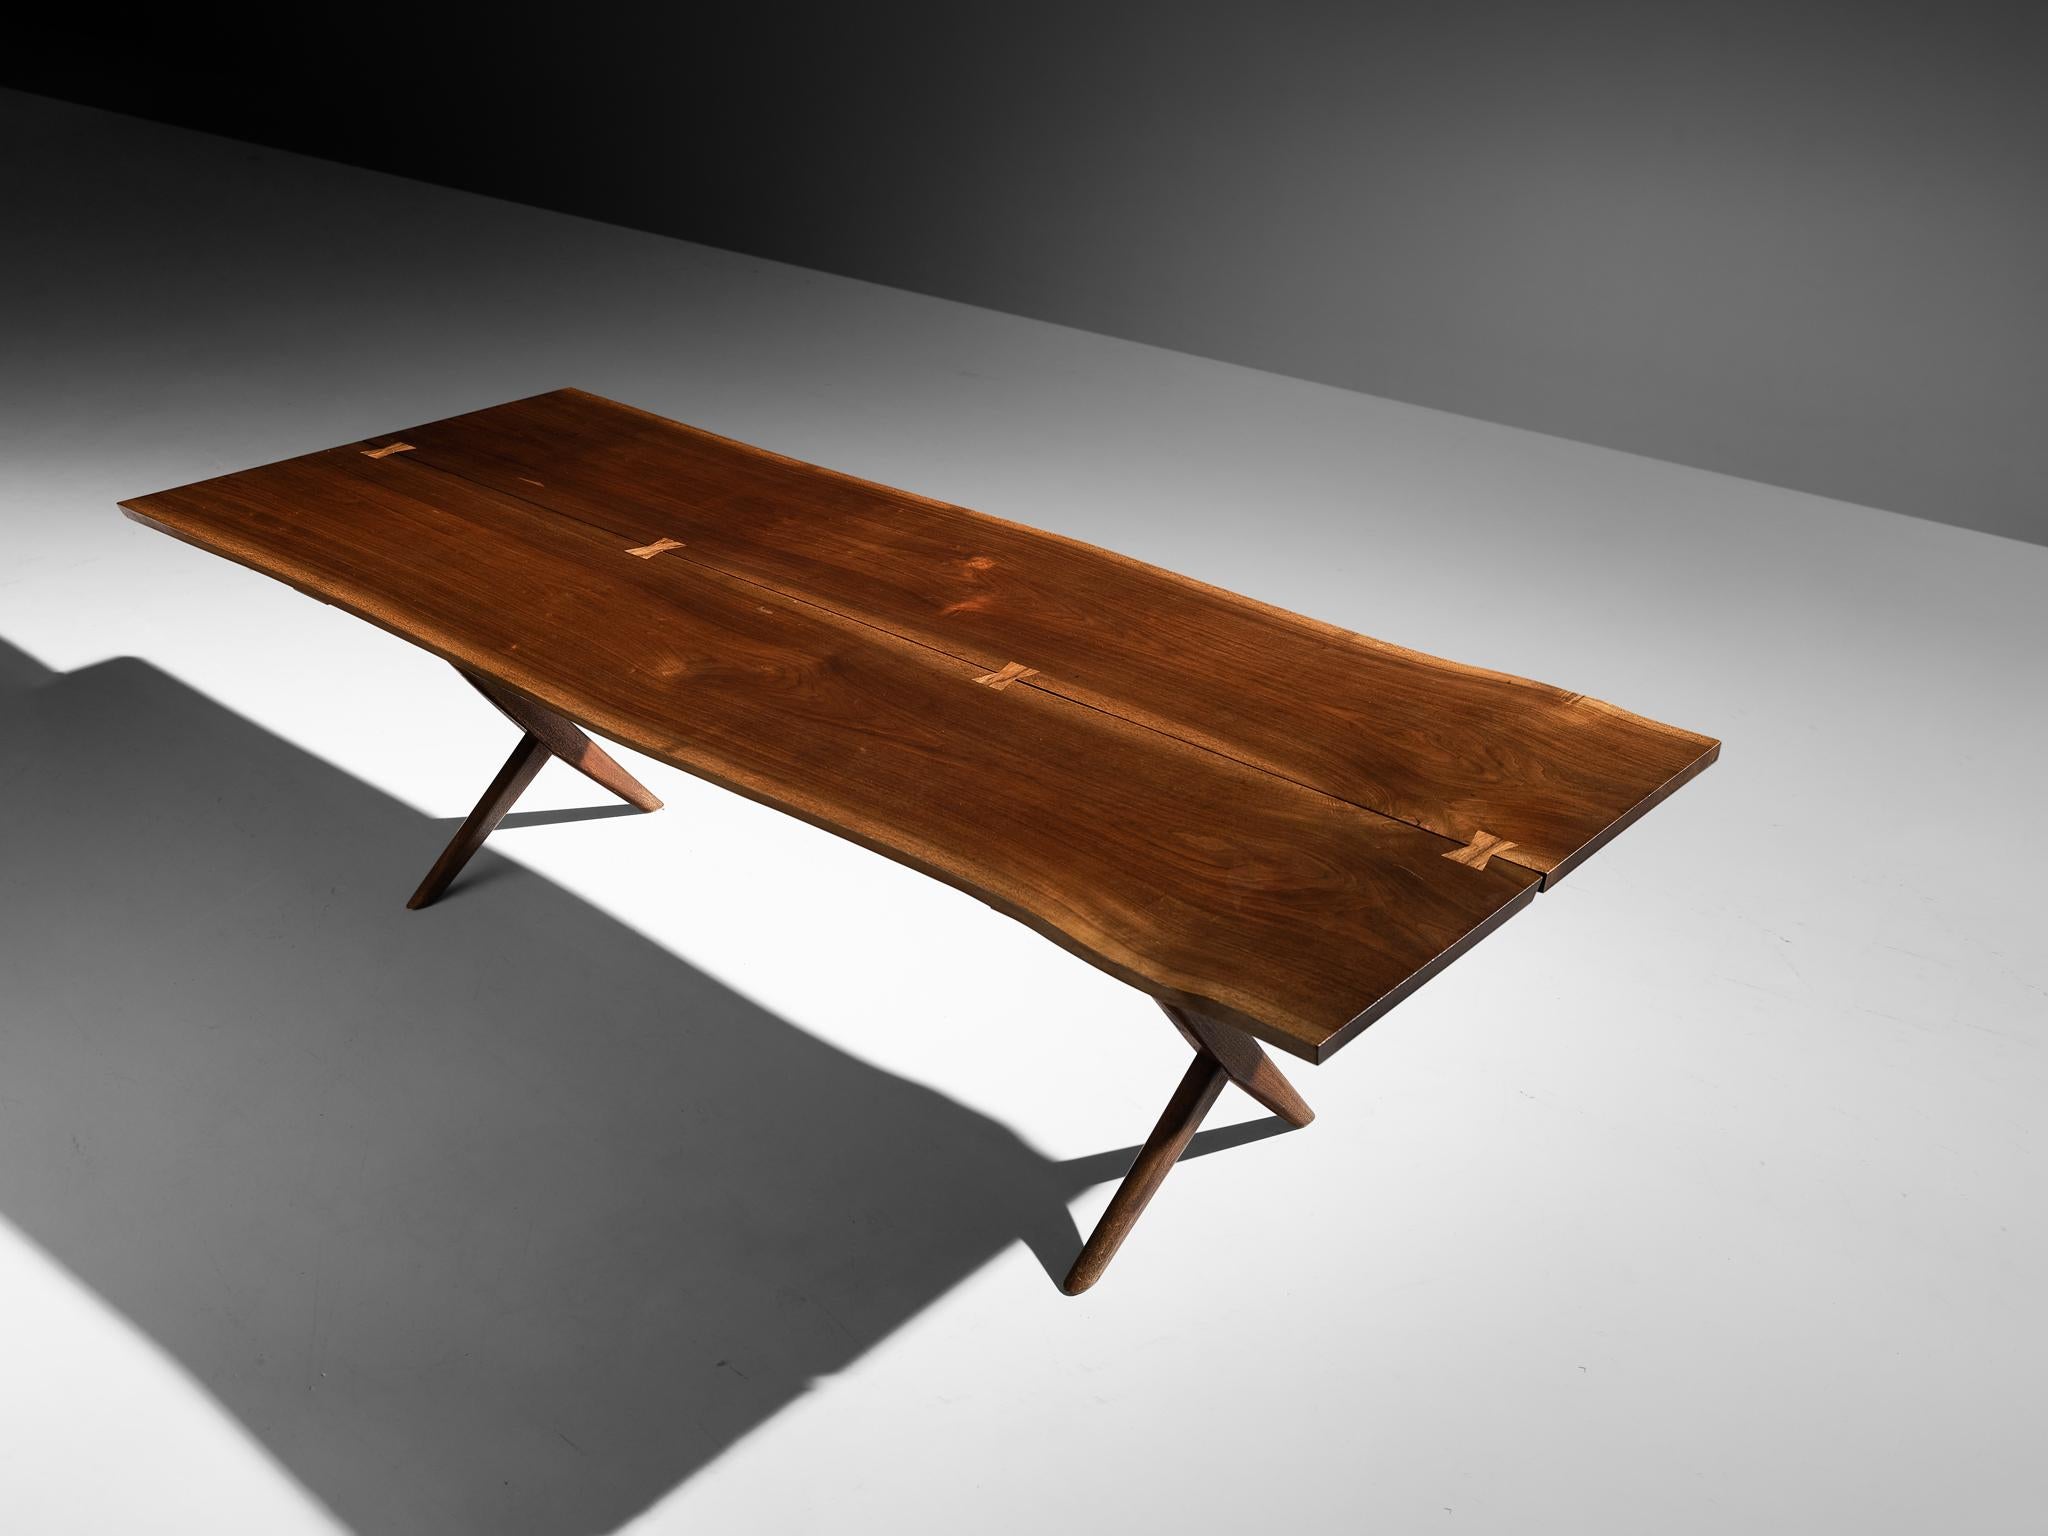 George Nakashima, large free edge cross-legged dining table in American black walnut, United States, 1959. 
 
This exquisite and exceptionally large dining table was designed by George Nakashima and created in his studio in New Hope, Pennsylvania.